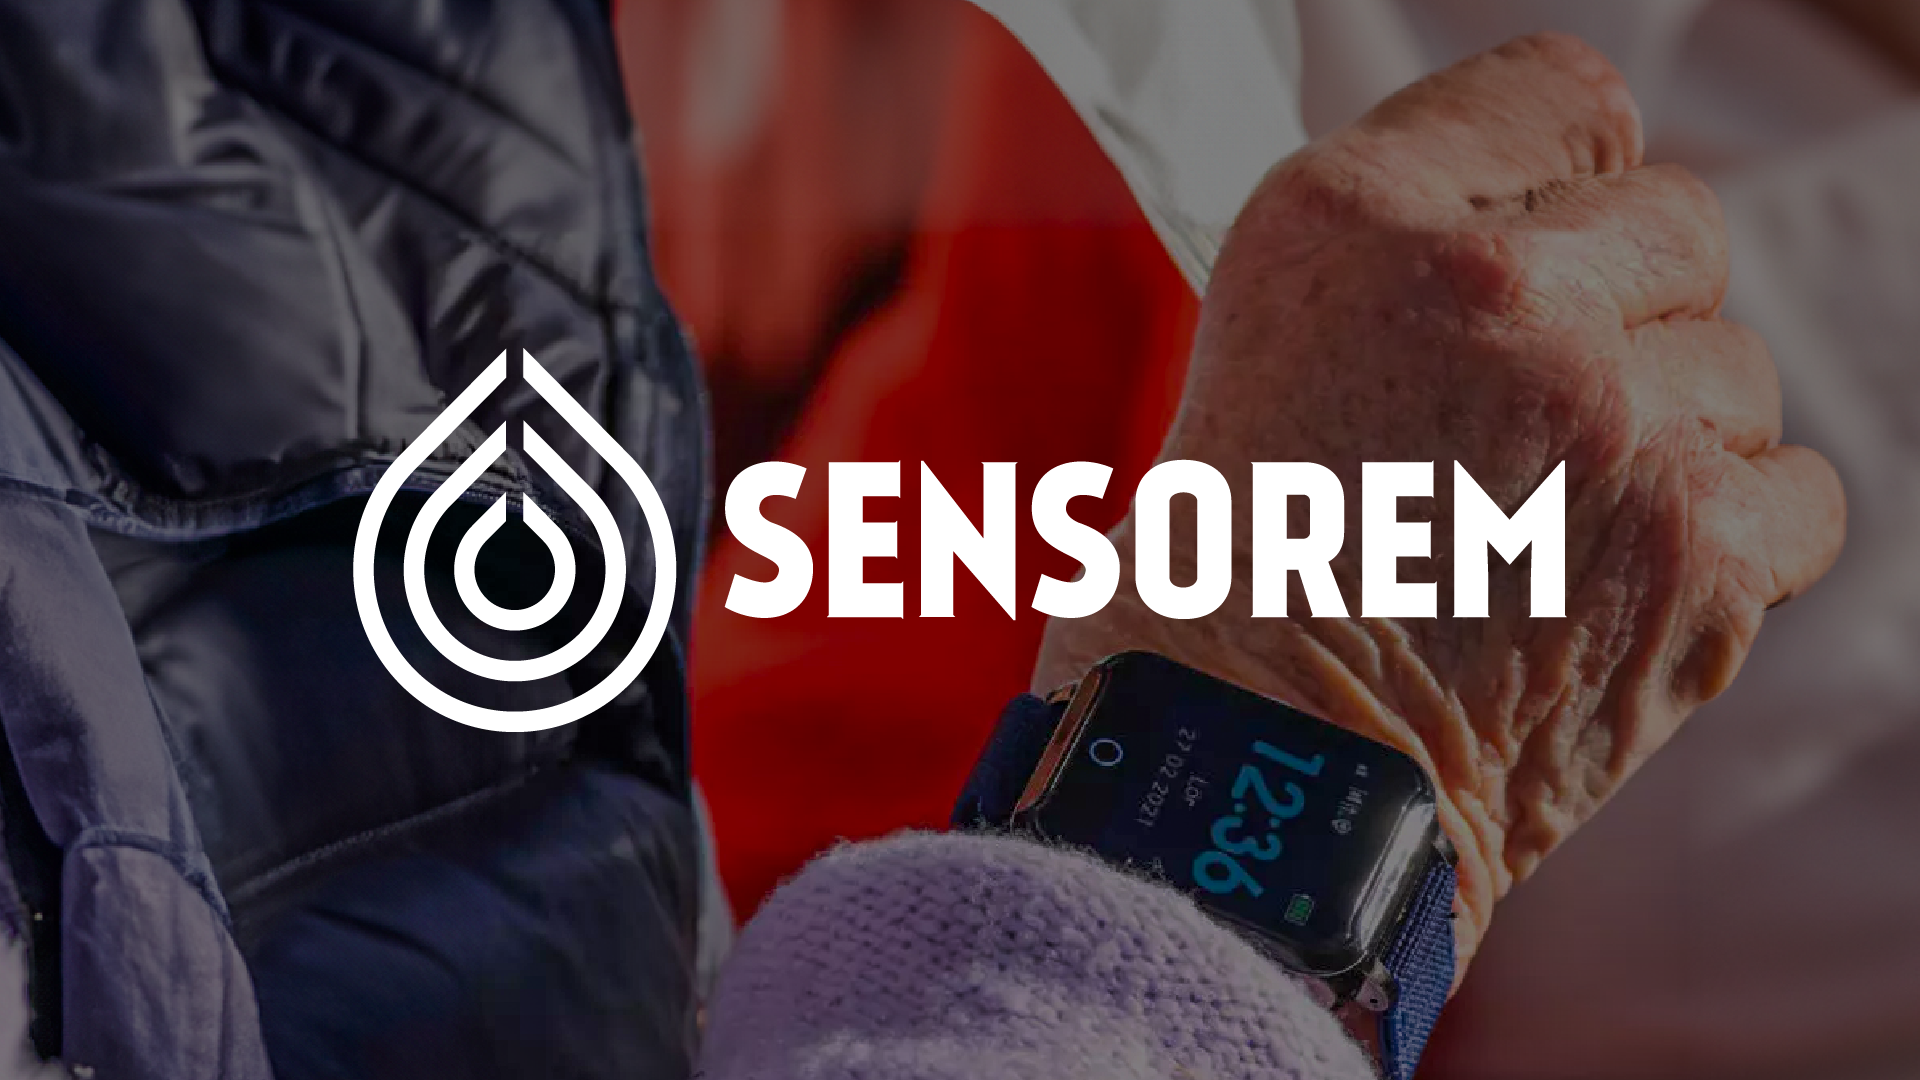 Sensorem case study header image, showcasing the safety alarm on a hand of an elderly man, and their logo